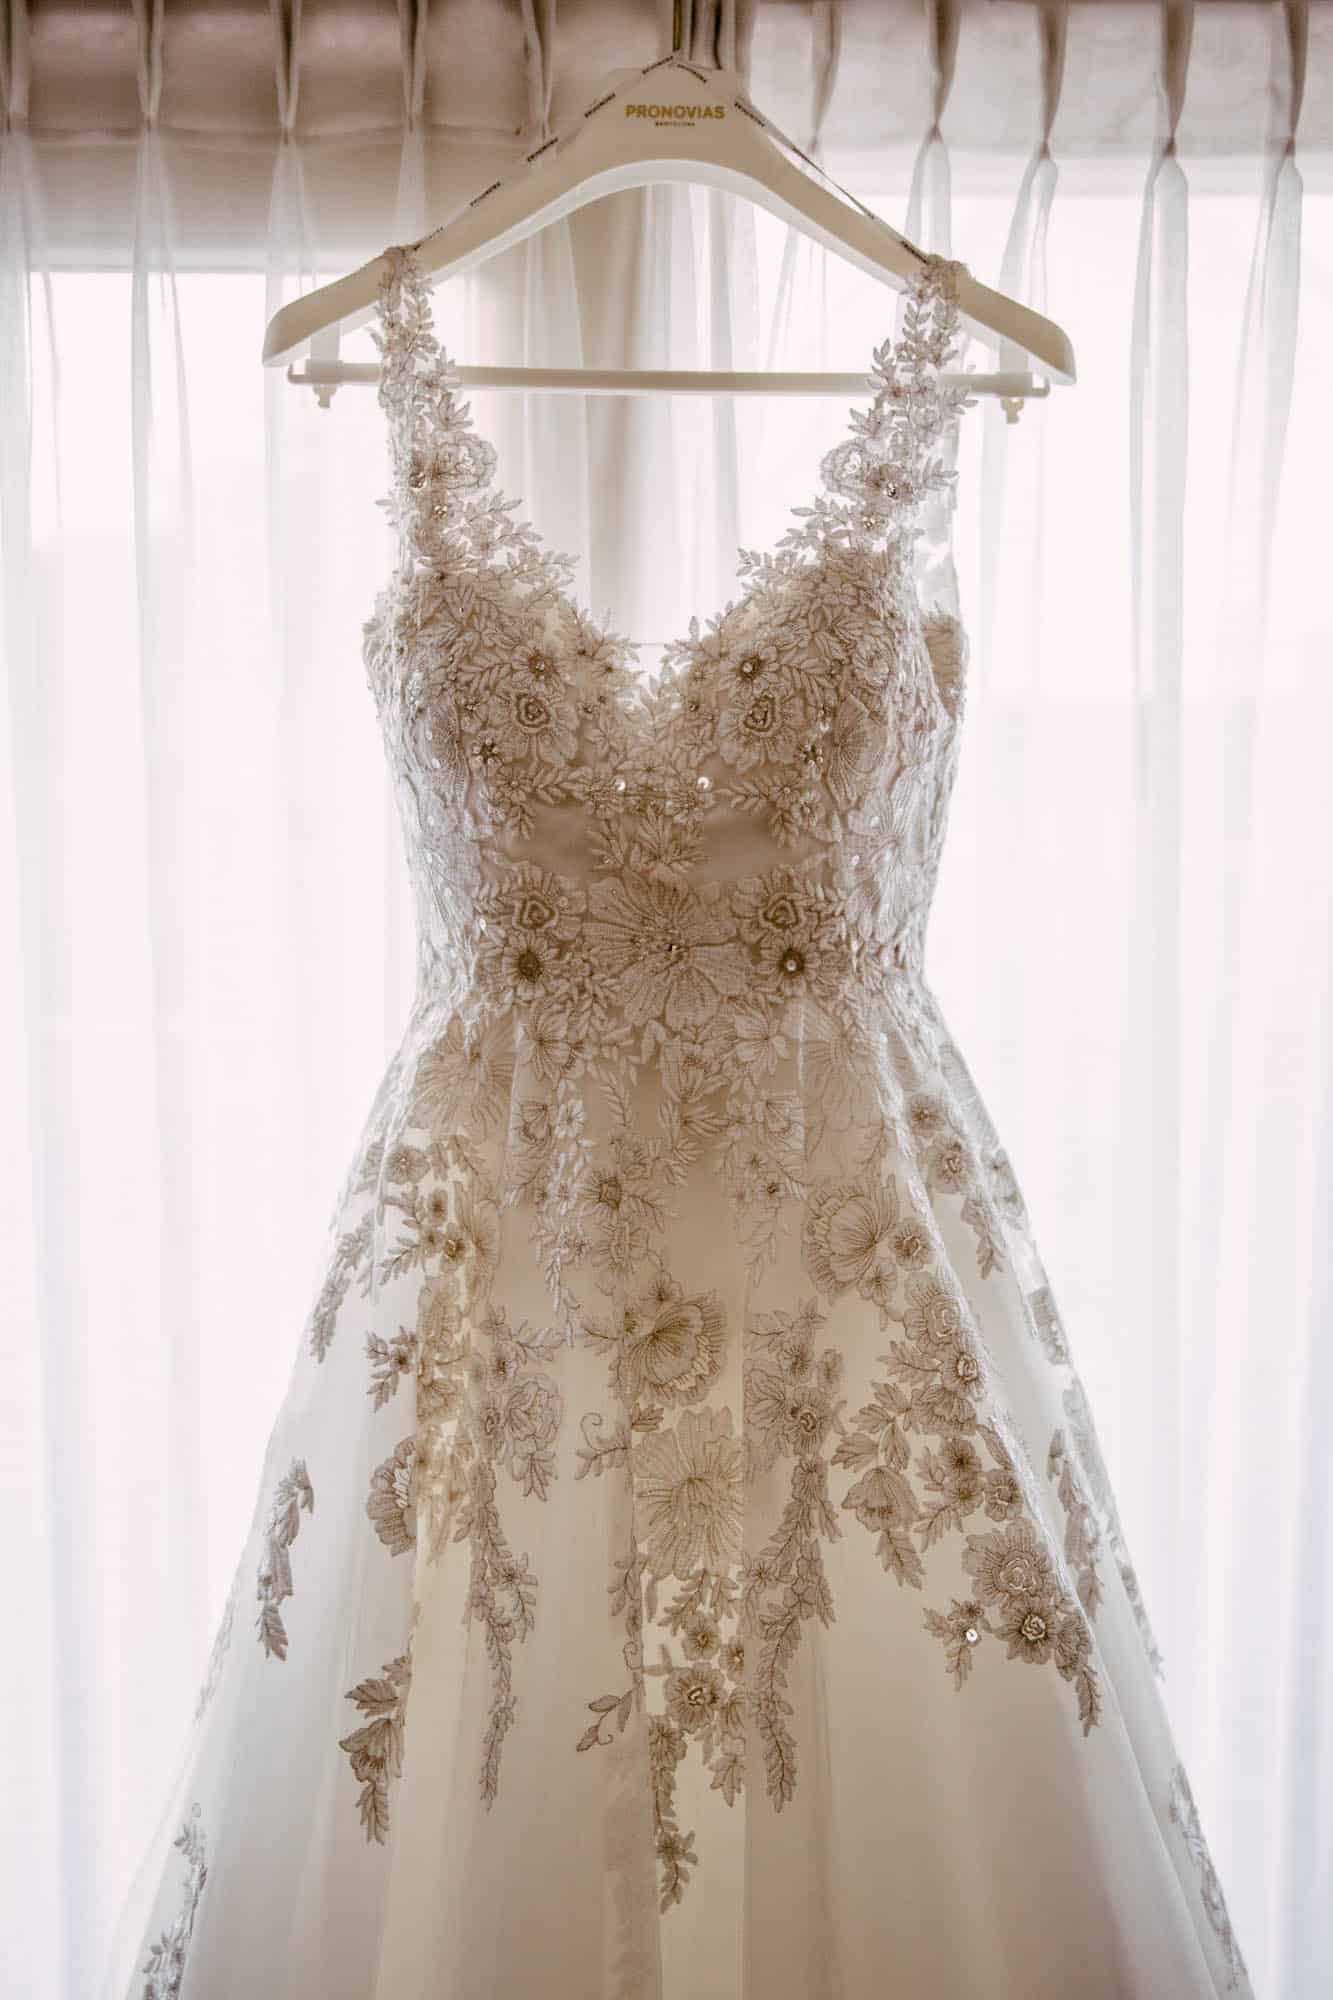 A wedding dress hangs from a hanger in front of a window.